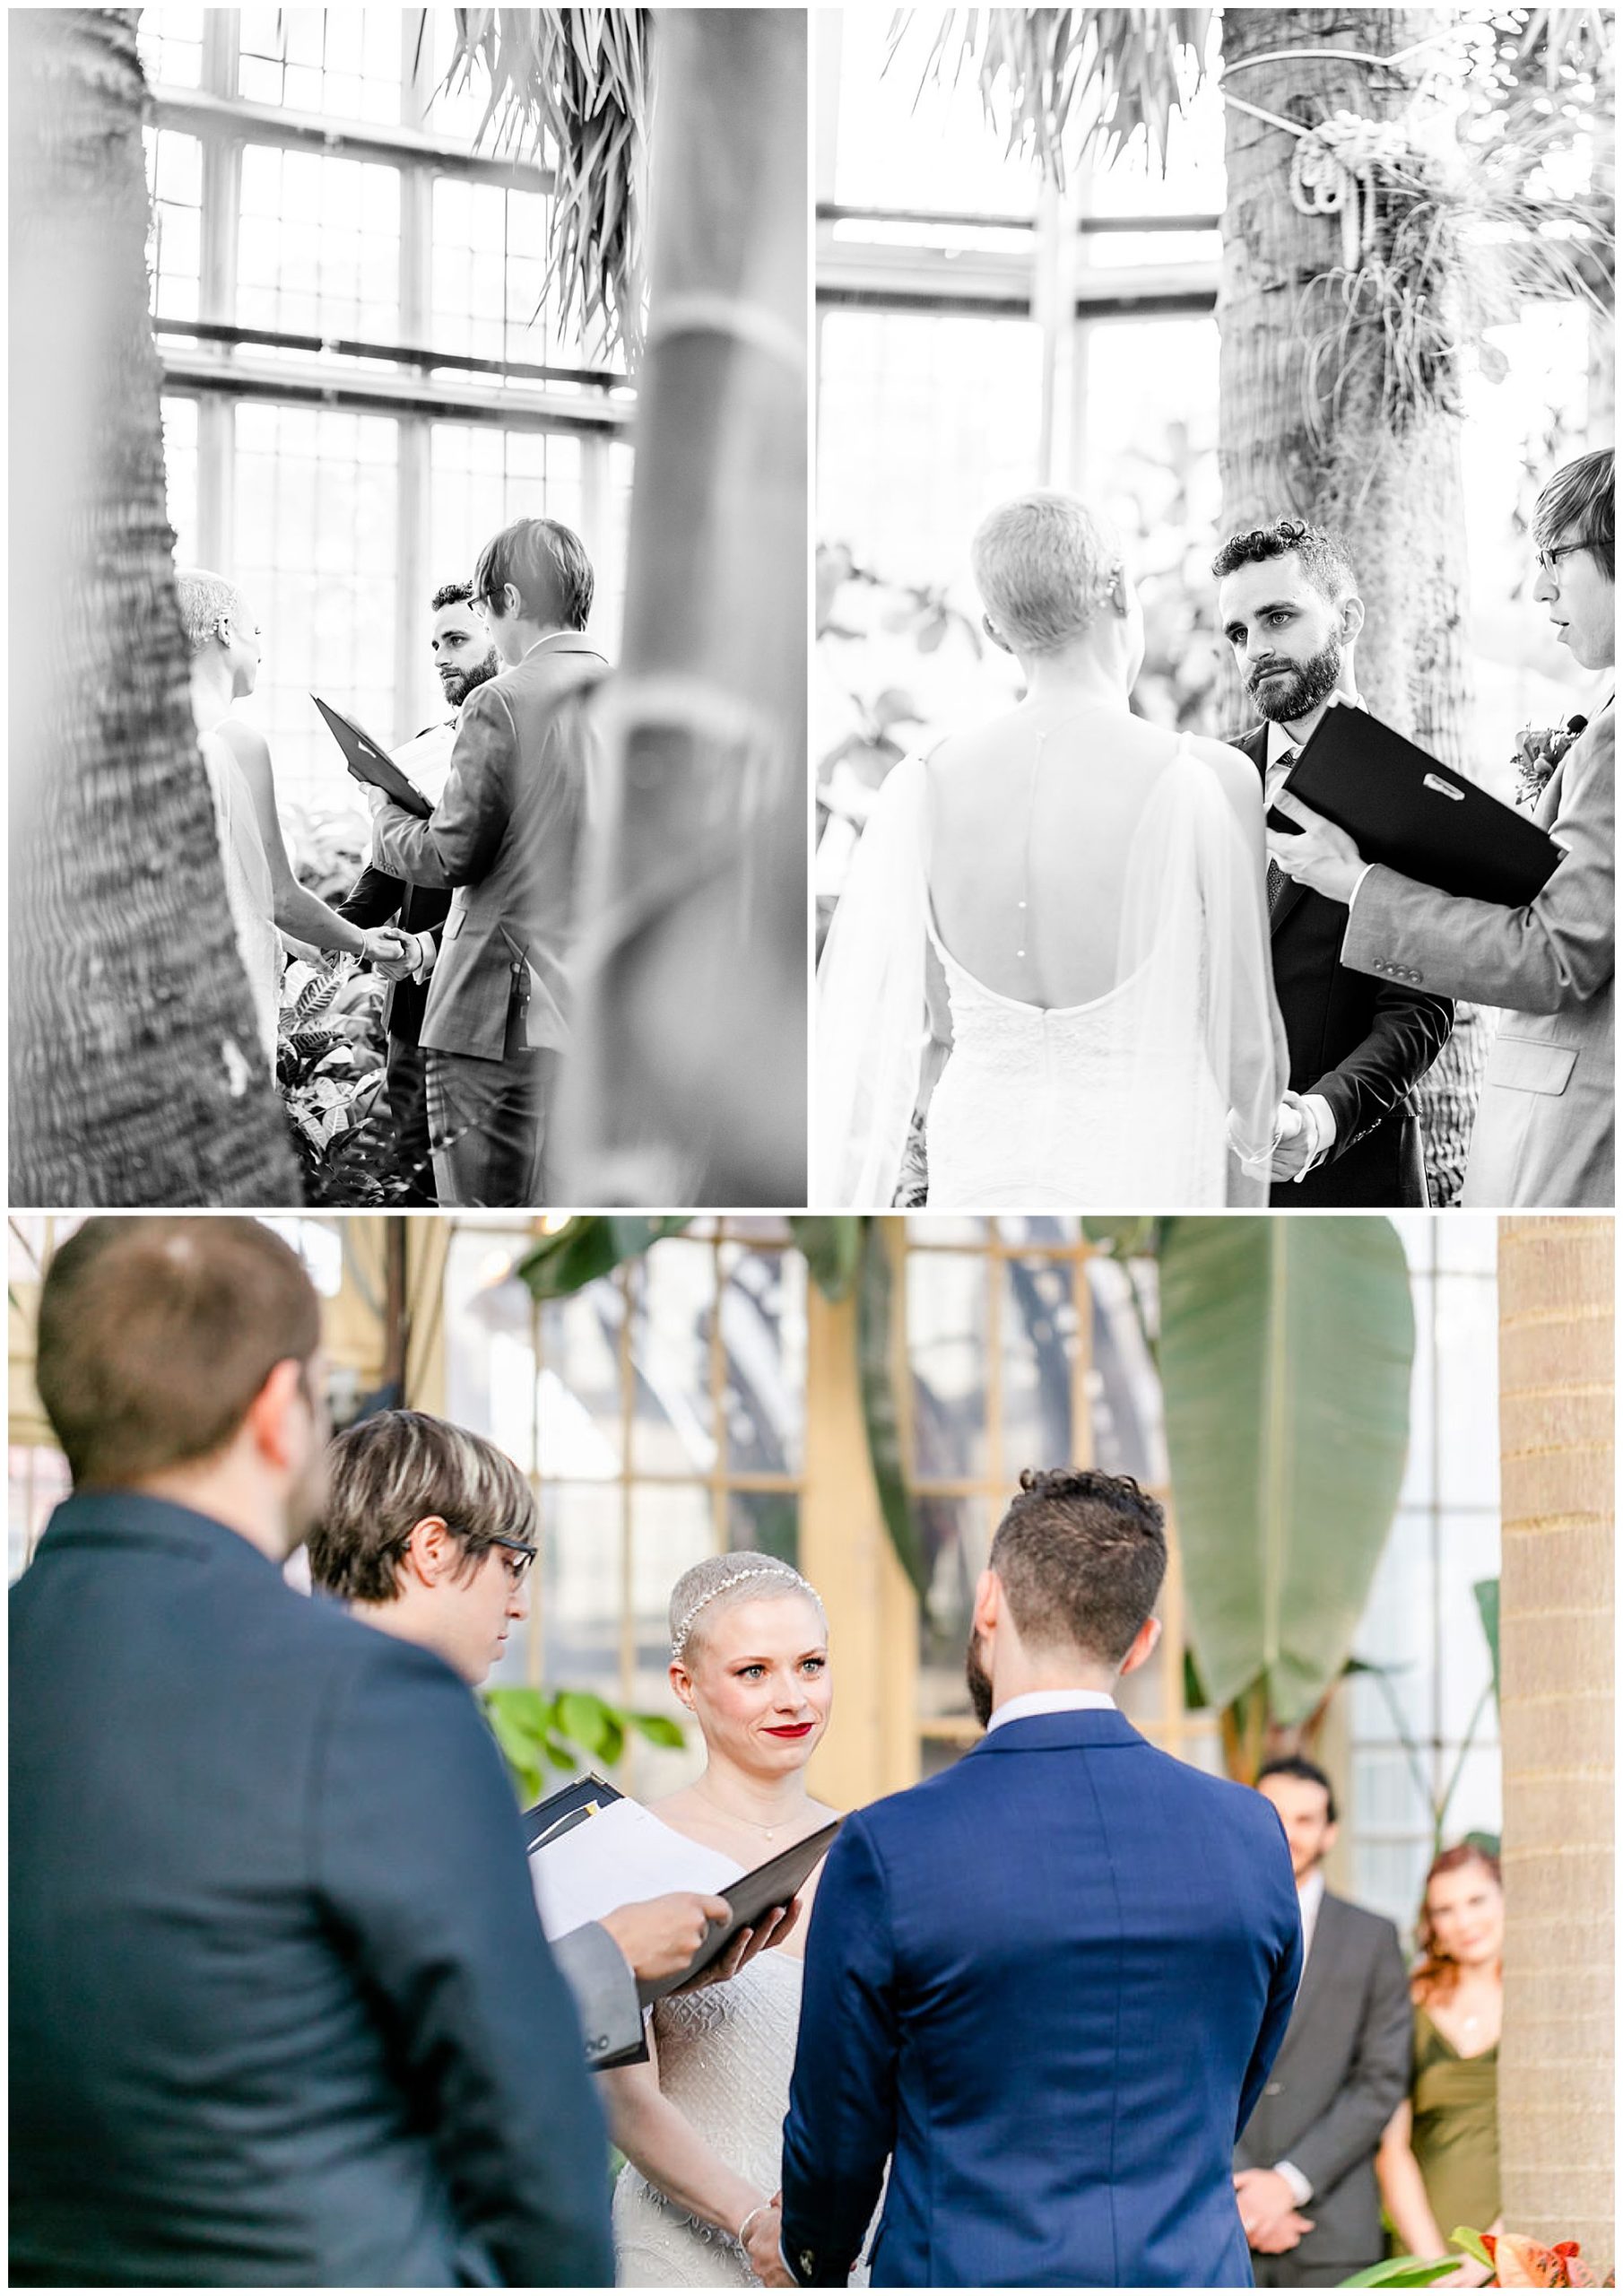 ethereal Rawlings Conservatory wedding, Baltimore wedding venues, Baltimore wedding photographer, Baltimore micro-wedding, Baltimore wedding photography, autumn wedding aesthetic, botanical gardens wedding, Baltimore botanical garden wedding, DC wedding photographer, Rachel E.H. Photography, black and white, couple at alter, dog at alter, couple smiling at each other, Carolyn Thombs hair and makeup